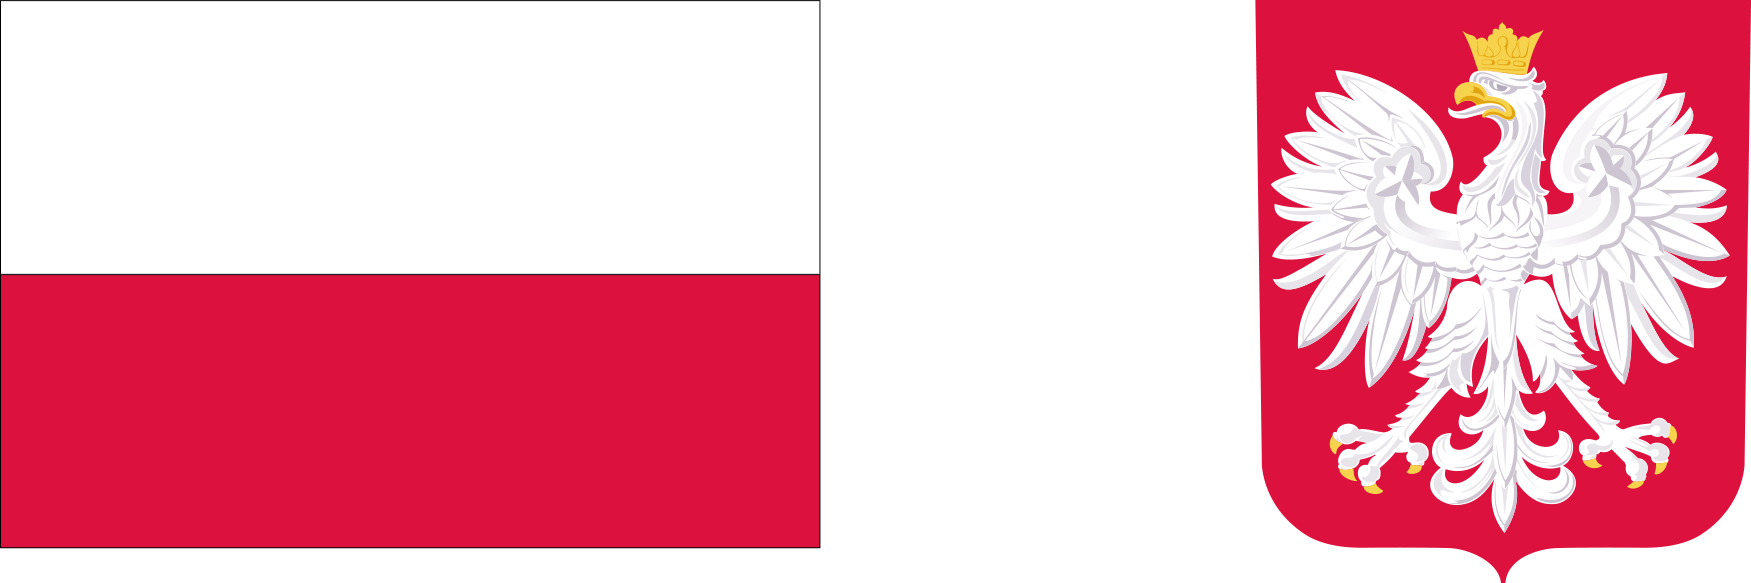 the colors and the national emblem of the Republic of Poland